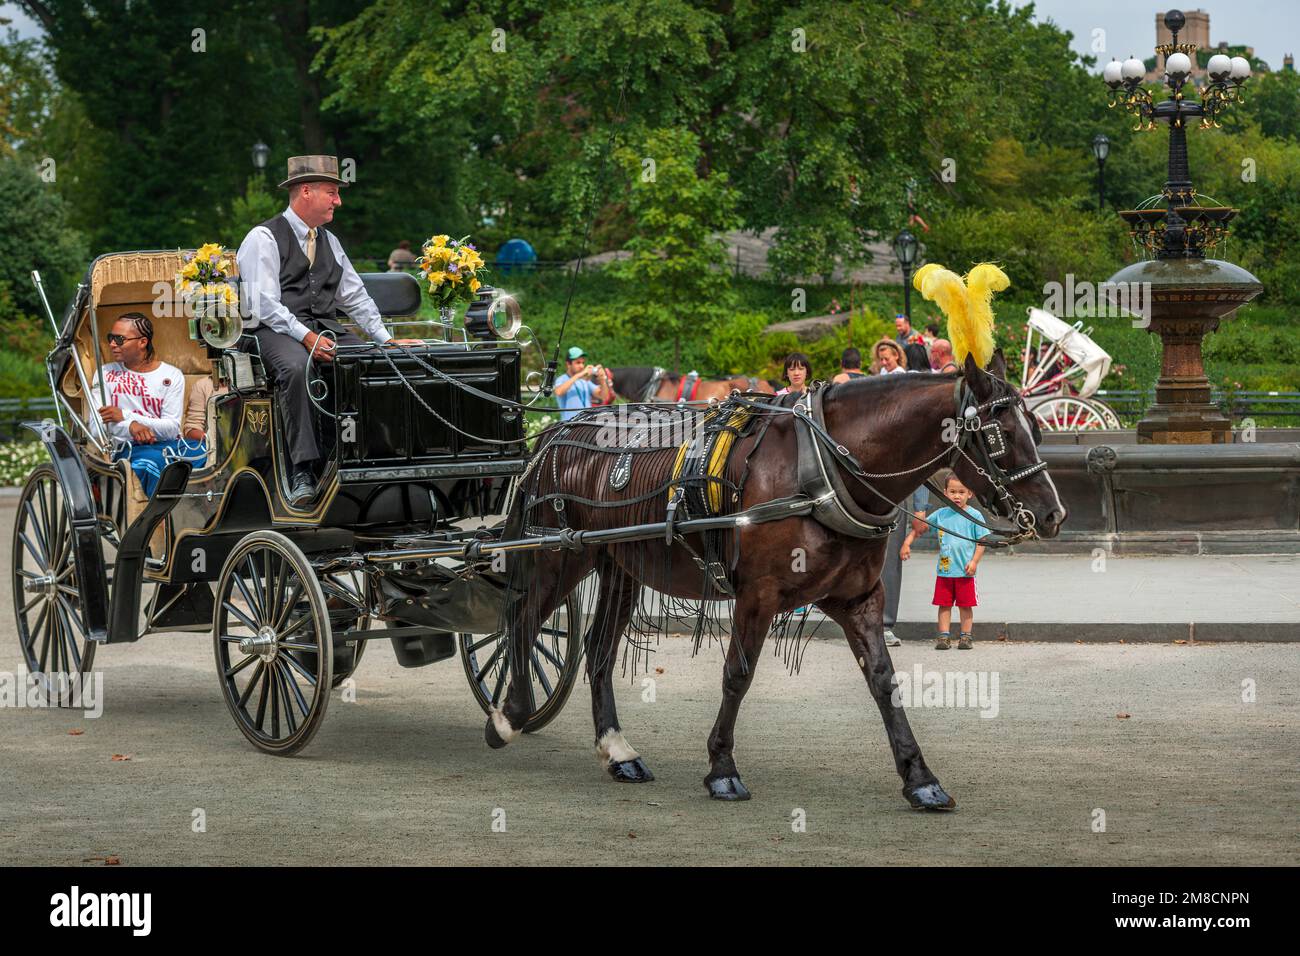 On a warm sunny day in New York City, one of the horse-drawn carriages takes passengers for a ride around Central Park, located between the Upper West Stock Photo